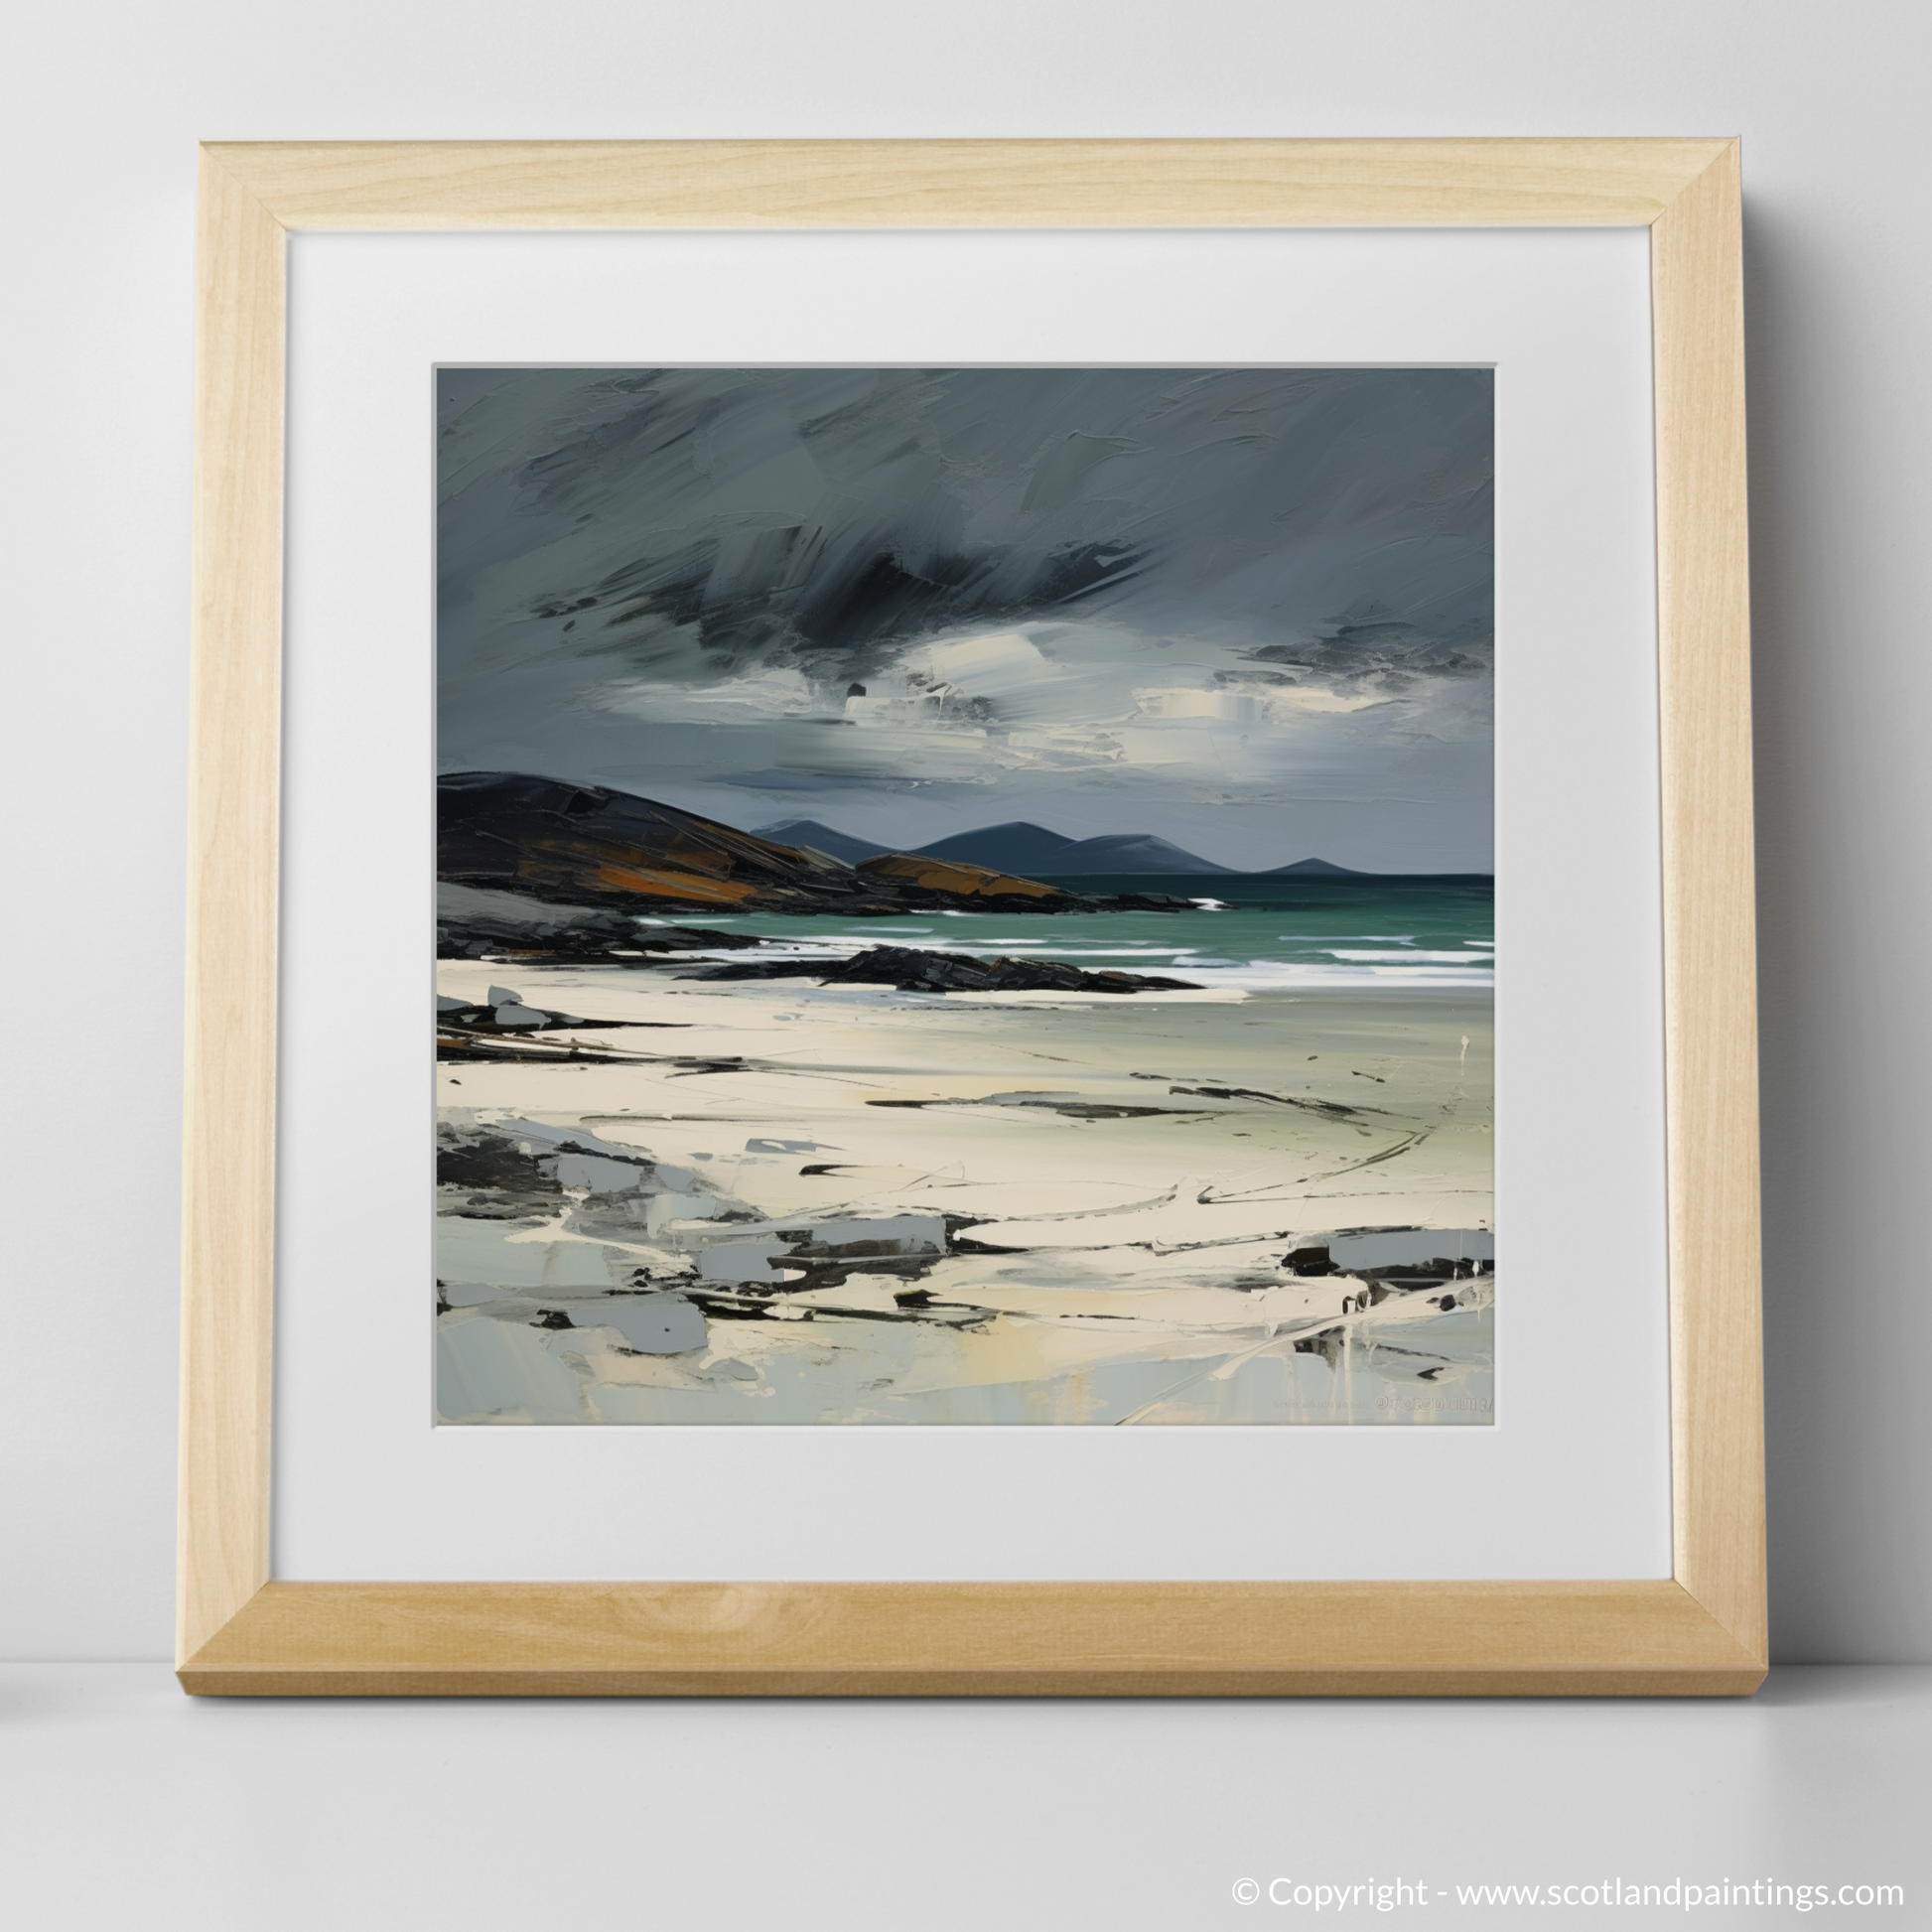 Art Print of Traigh Mhor, Isle of Barra with a natural frame